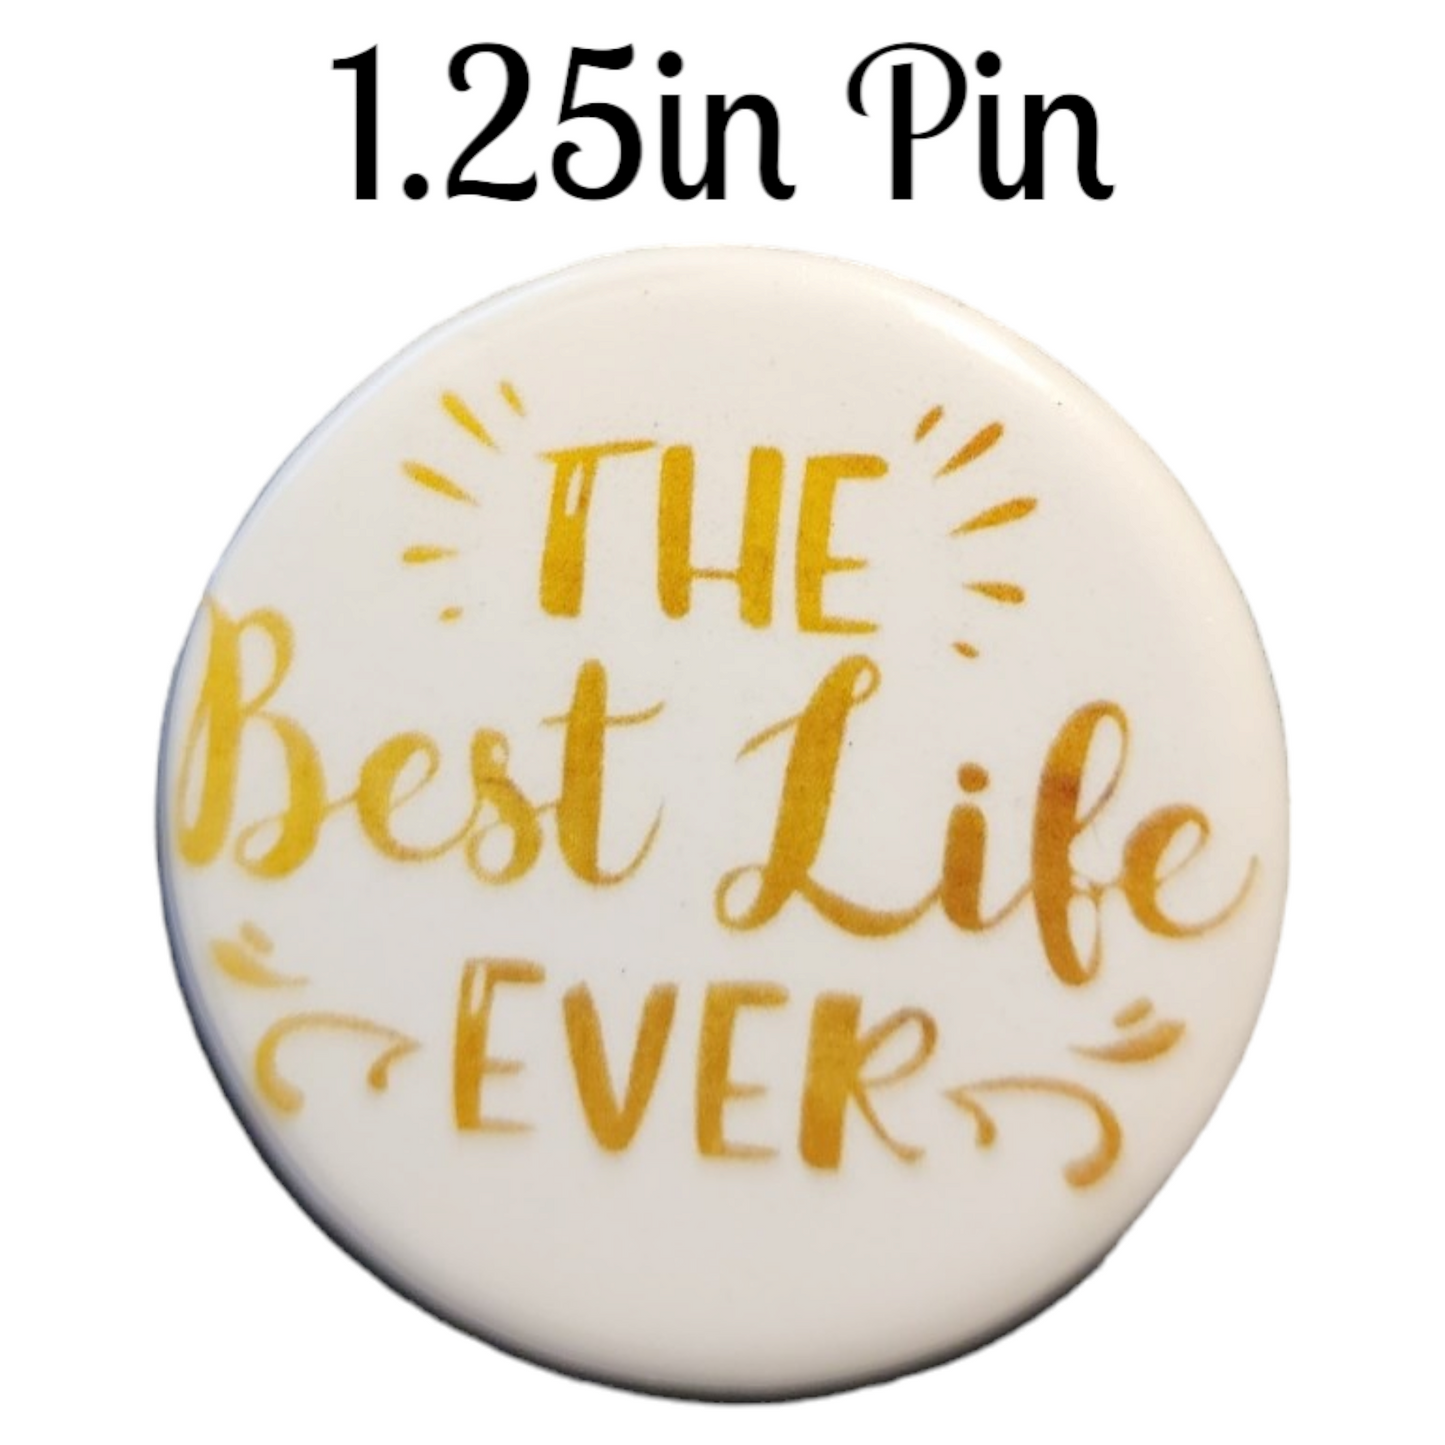 JW - 1.25" Button Pin - Best Life Ever